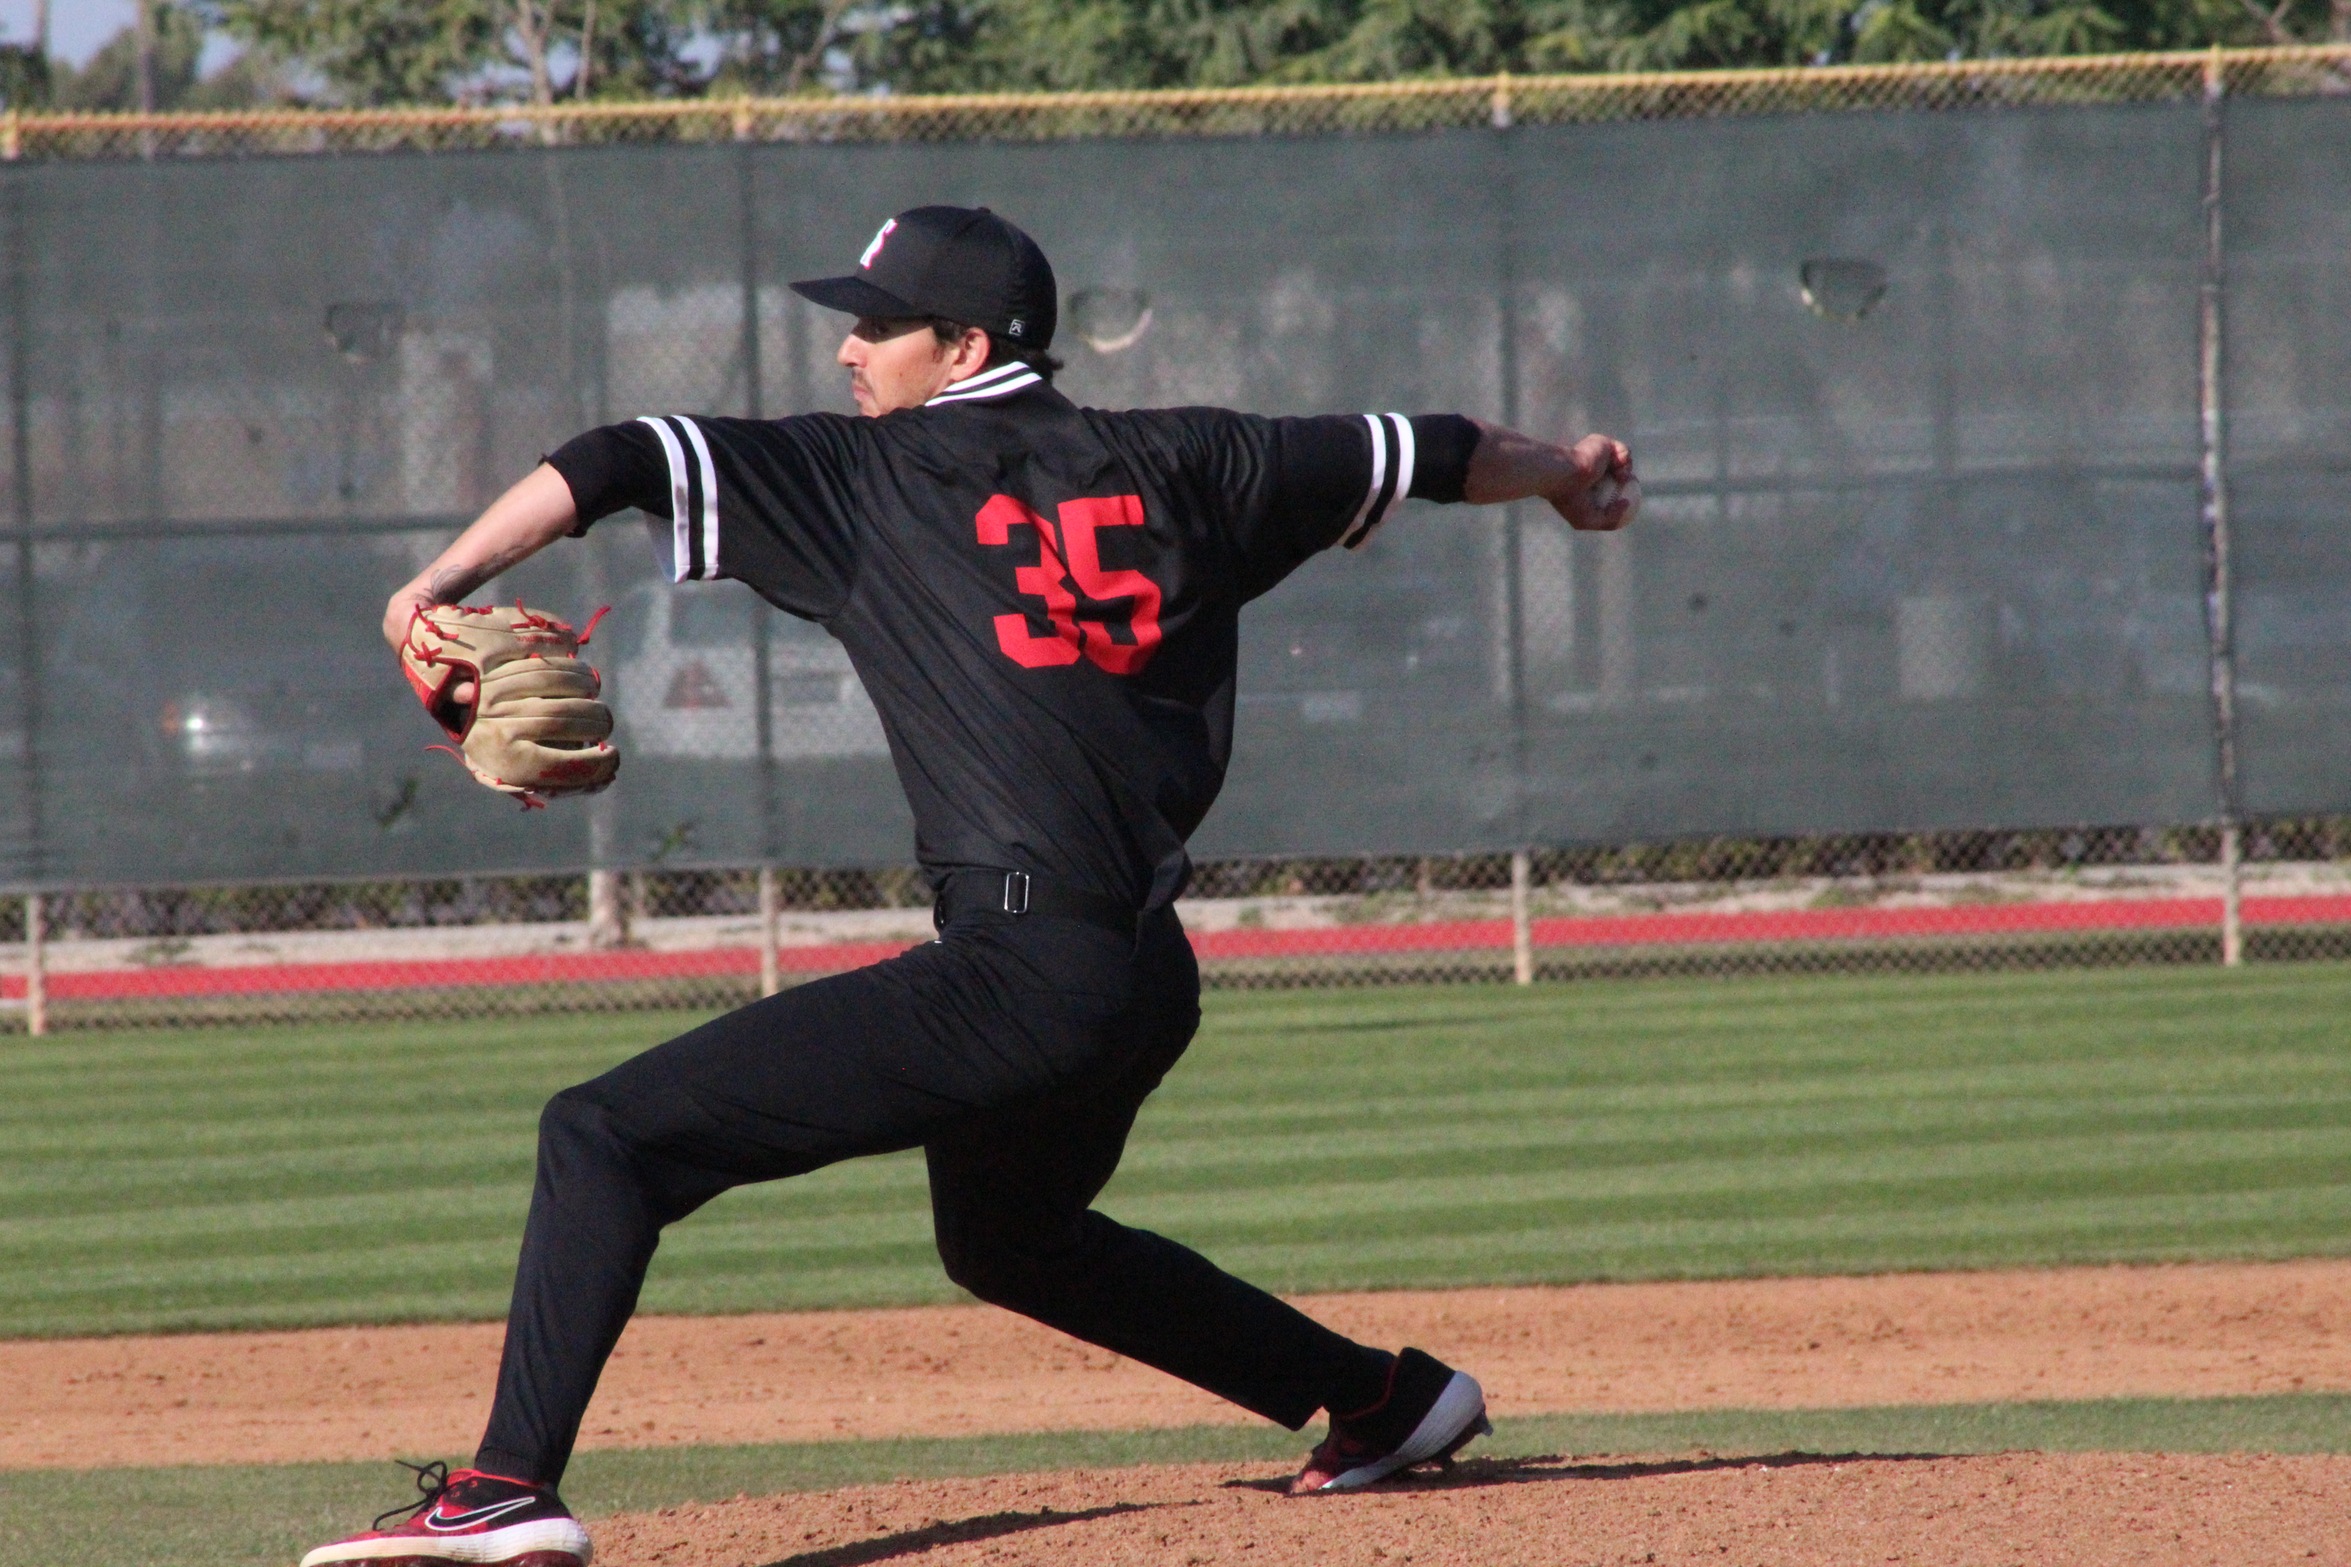 Lopez Comes Up Clutch While Samuels Finishes Strong in 5-4 Win Over GWC